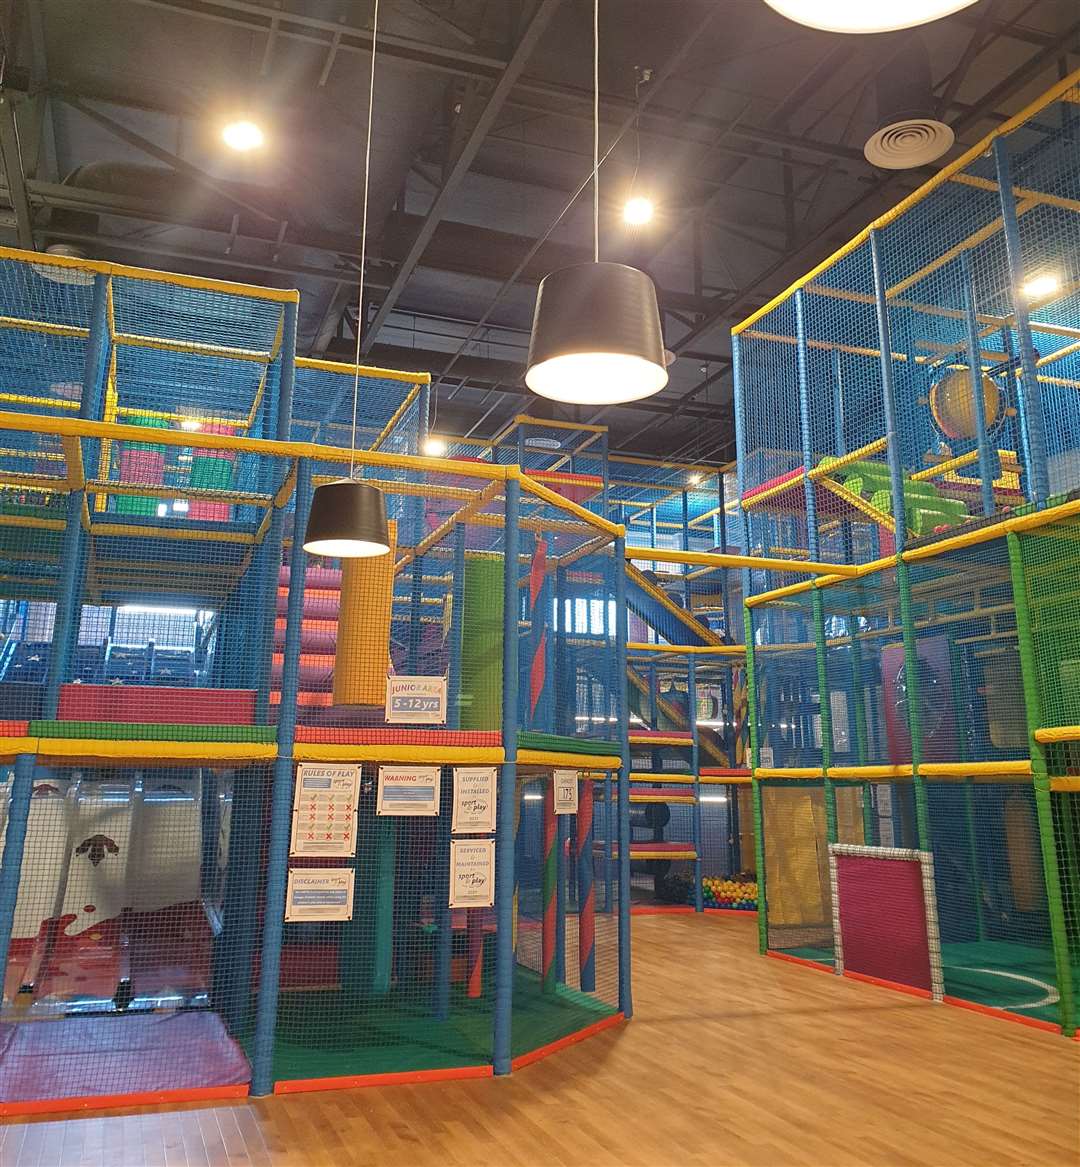 Sparking particular interest is the huge soft play area, which will have multiple levels and slides